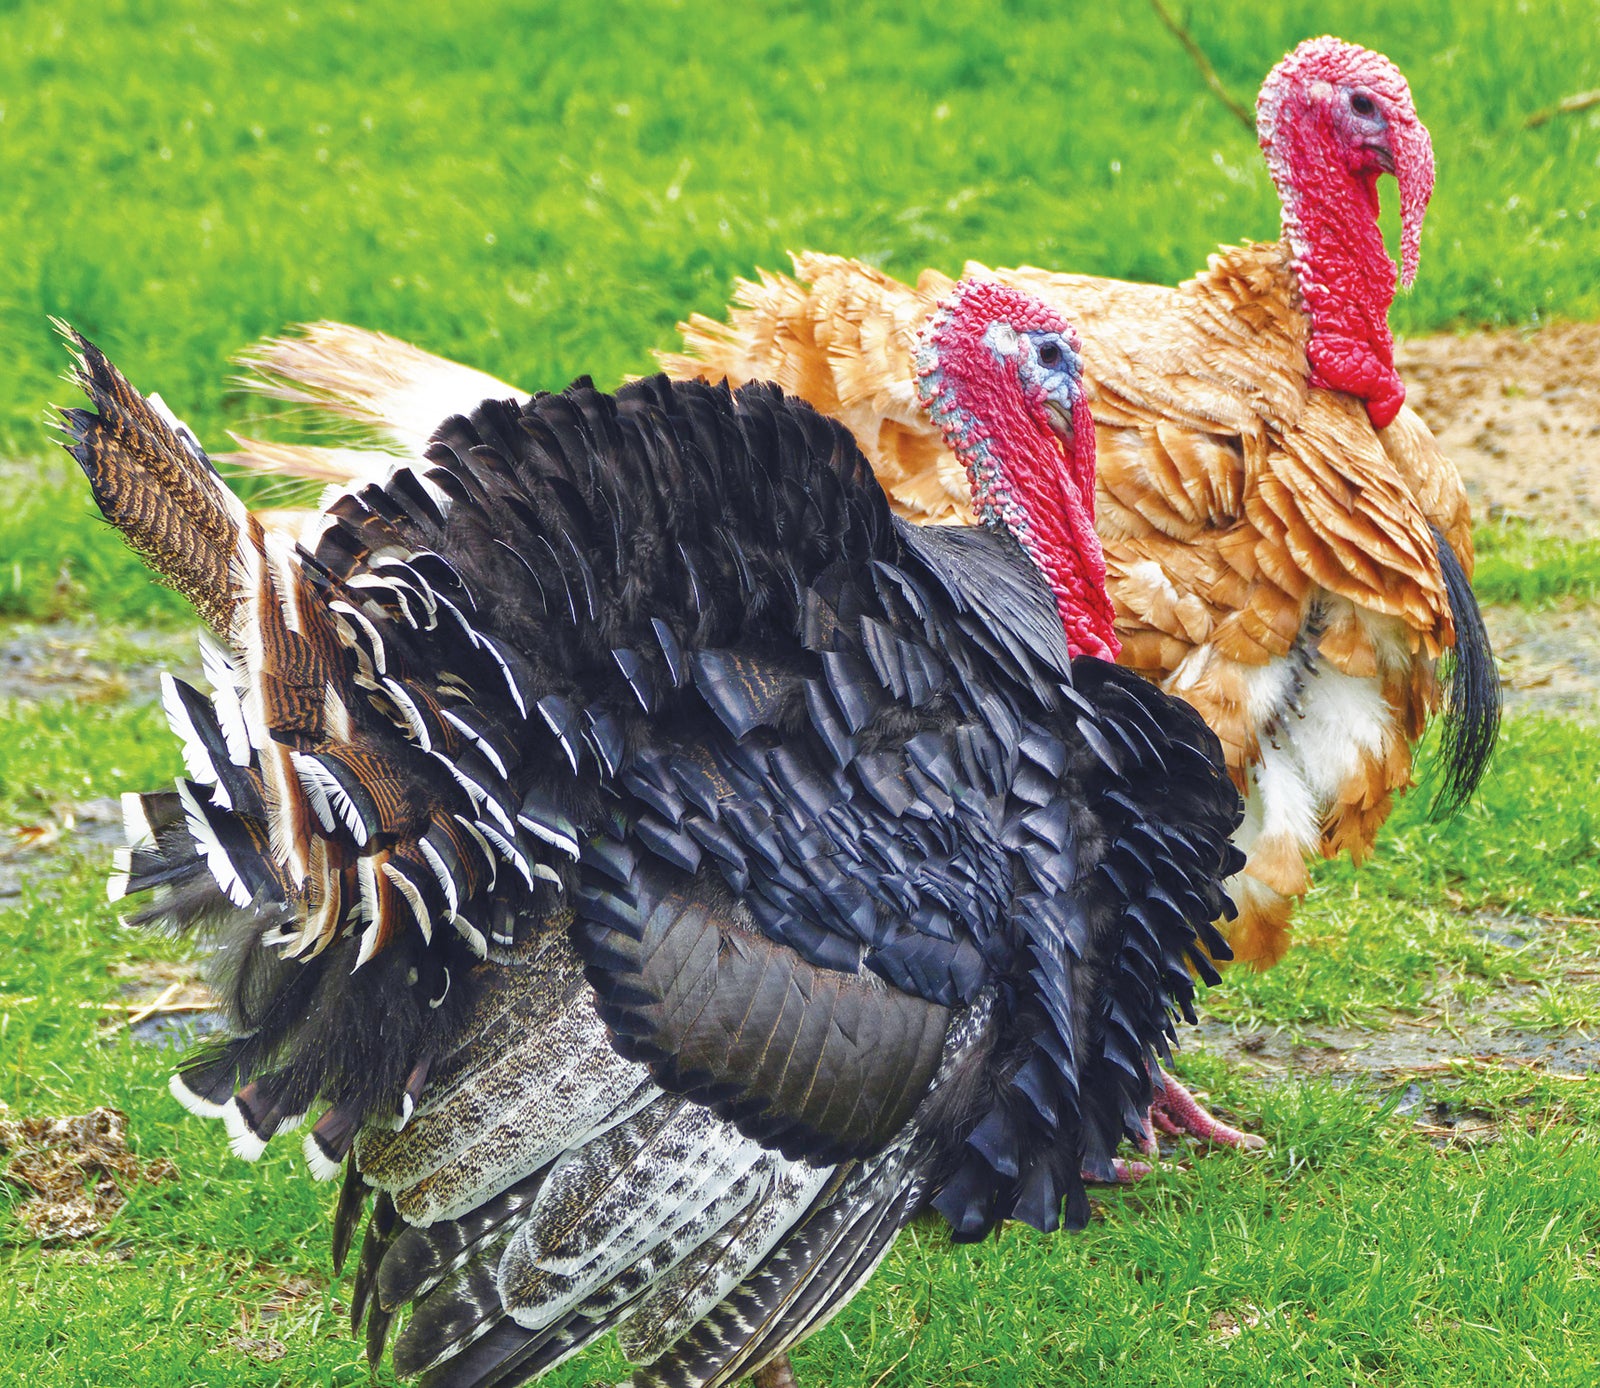 Giving thanks for interesting turkey facts - The Advocate-Messenger | The  Advocate-Messenger